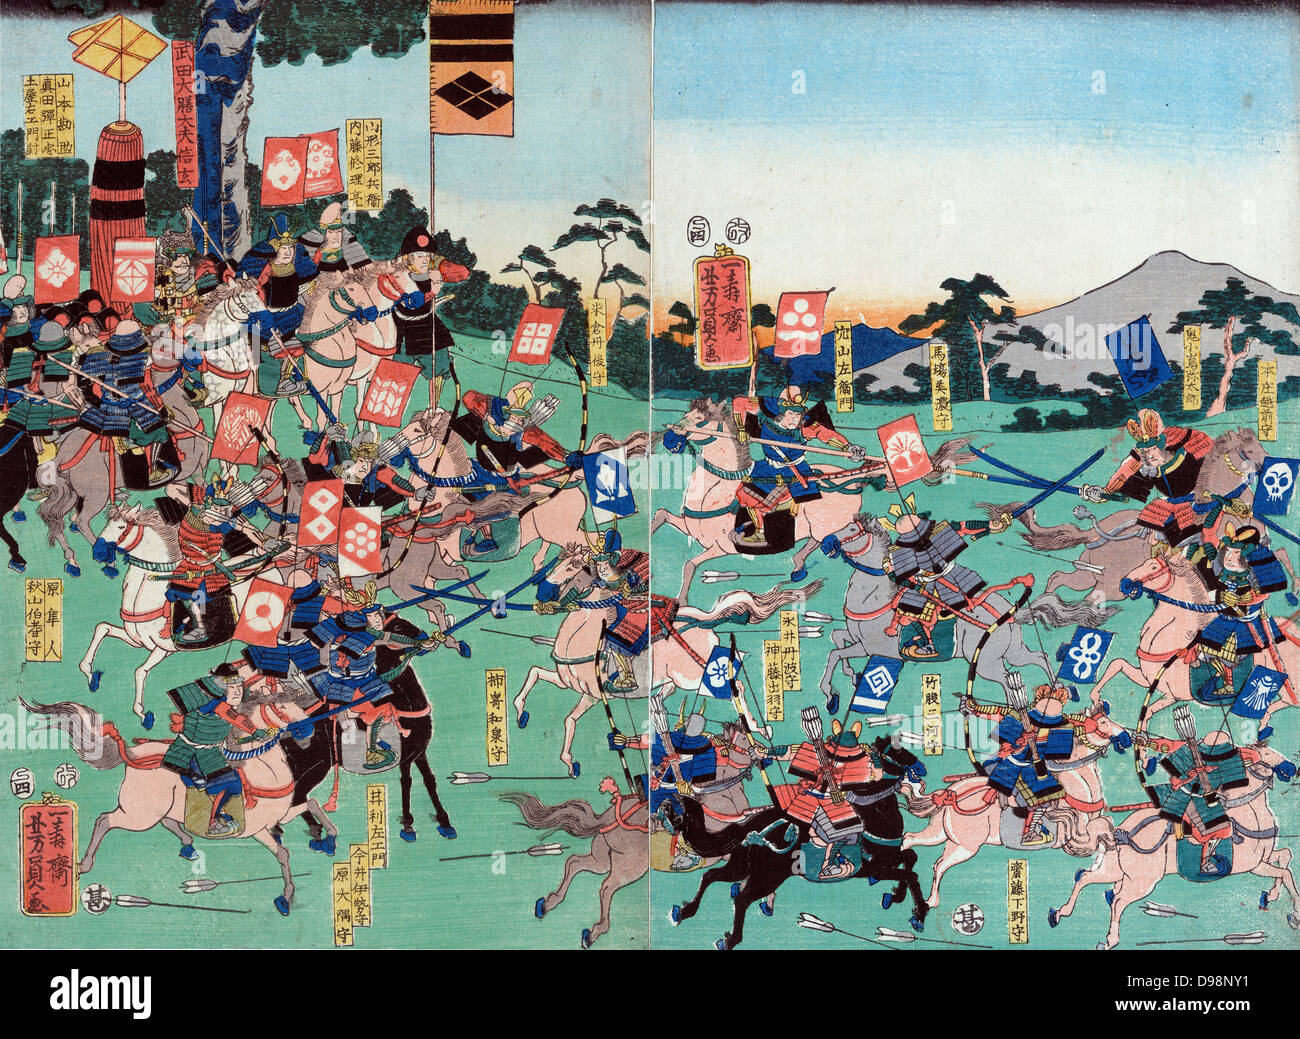 Sengoku Period High Resolution Stock Photography and Images - Alamy